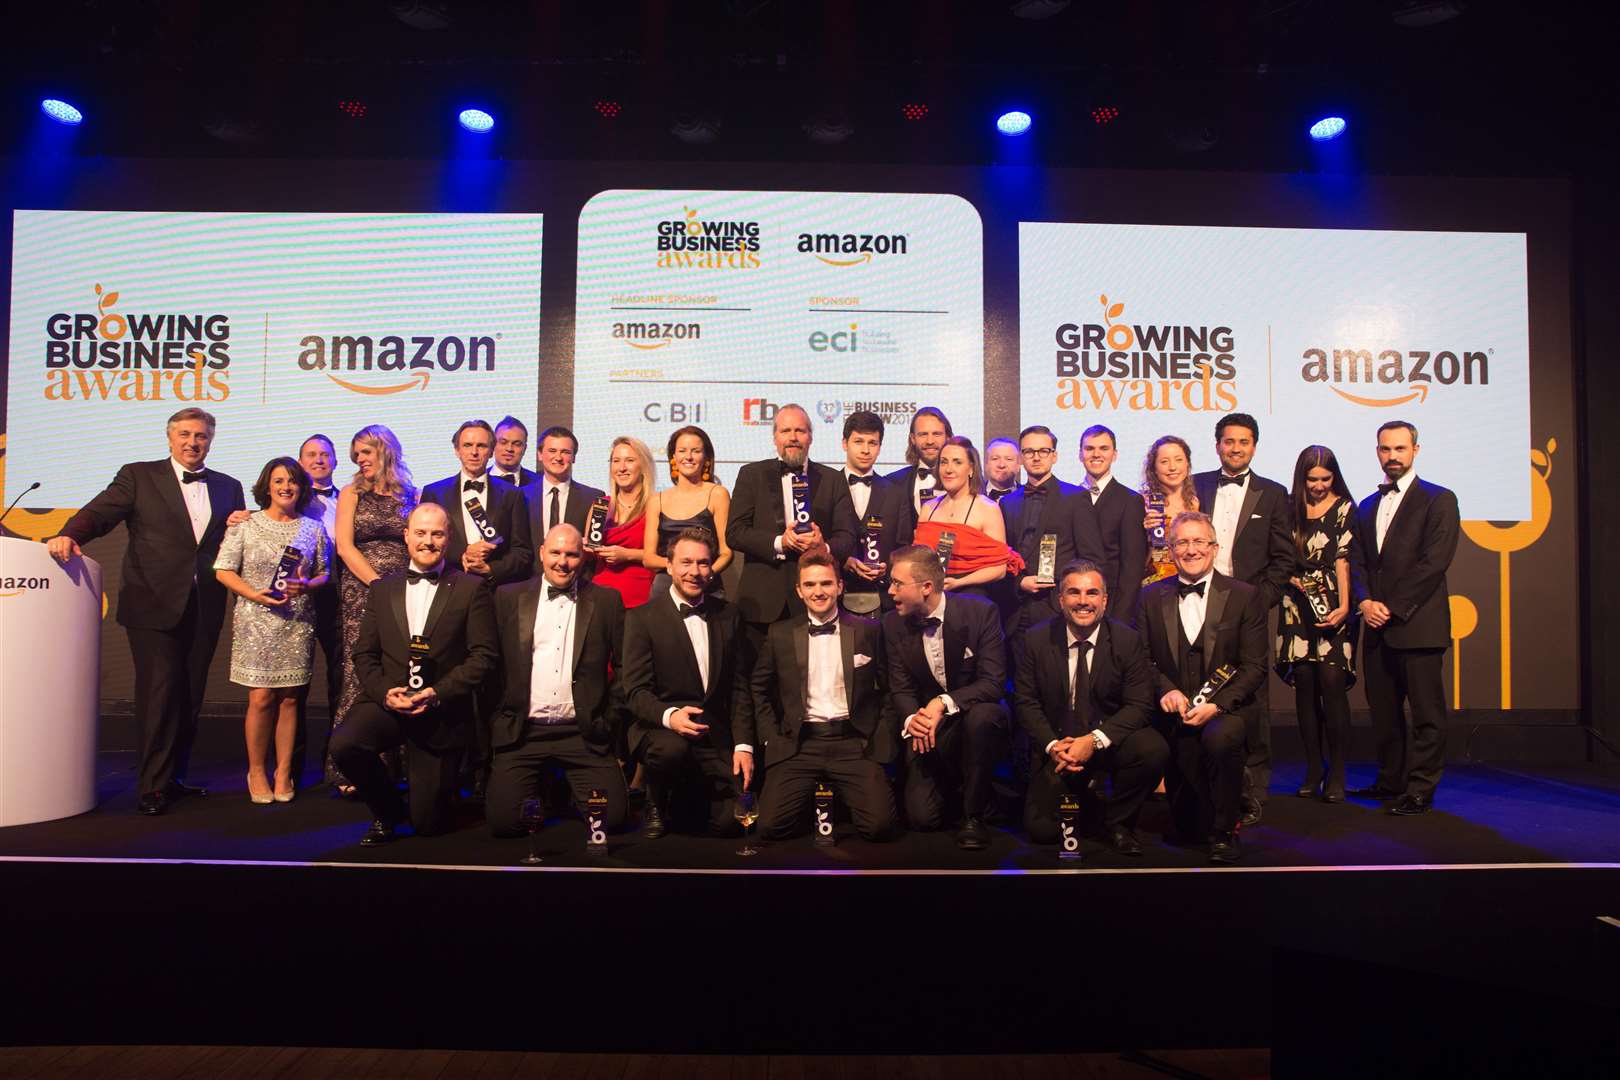 The winners at the Amazon Growing Business Awards held at the Brewery in London